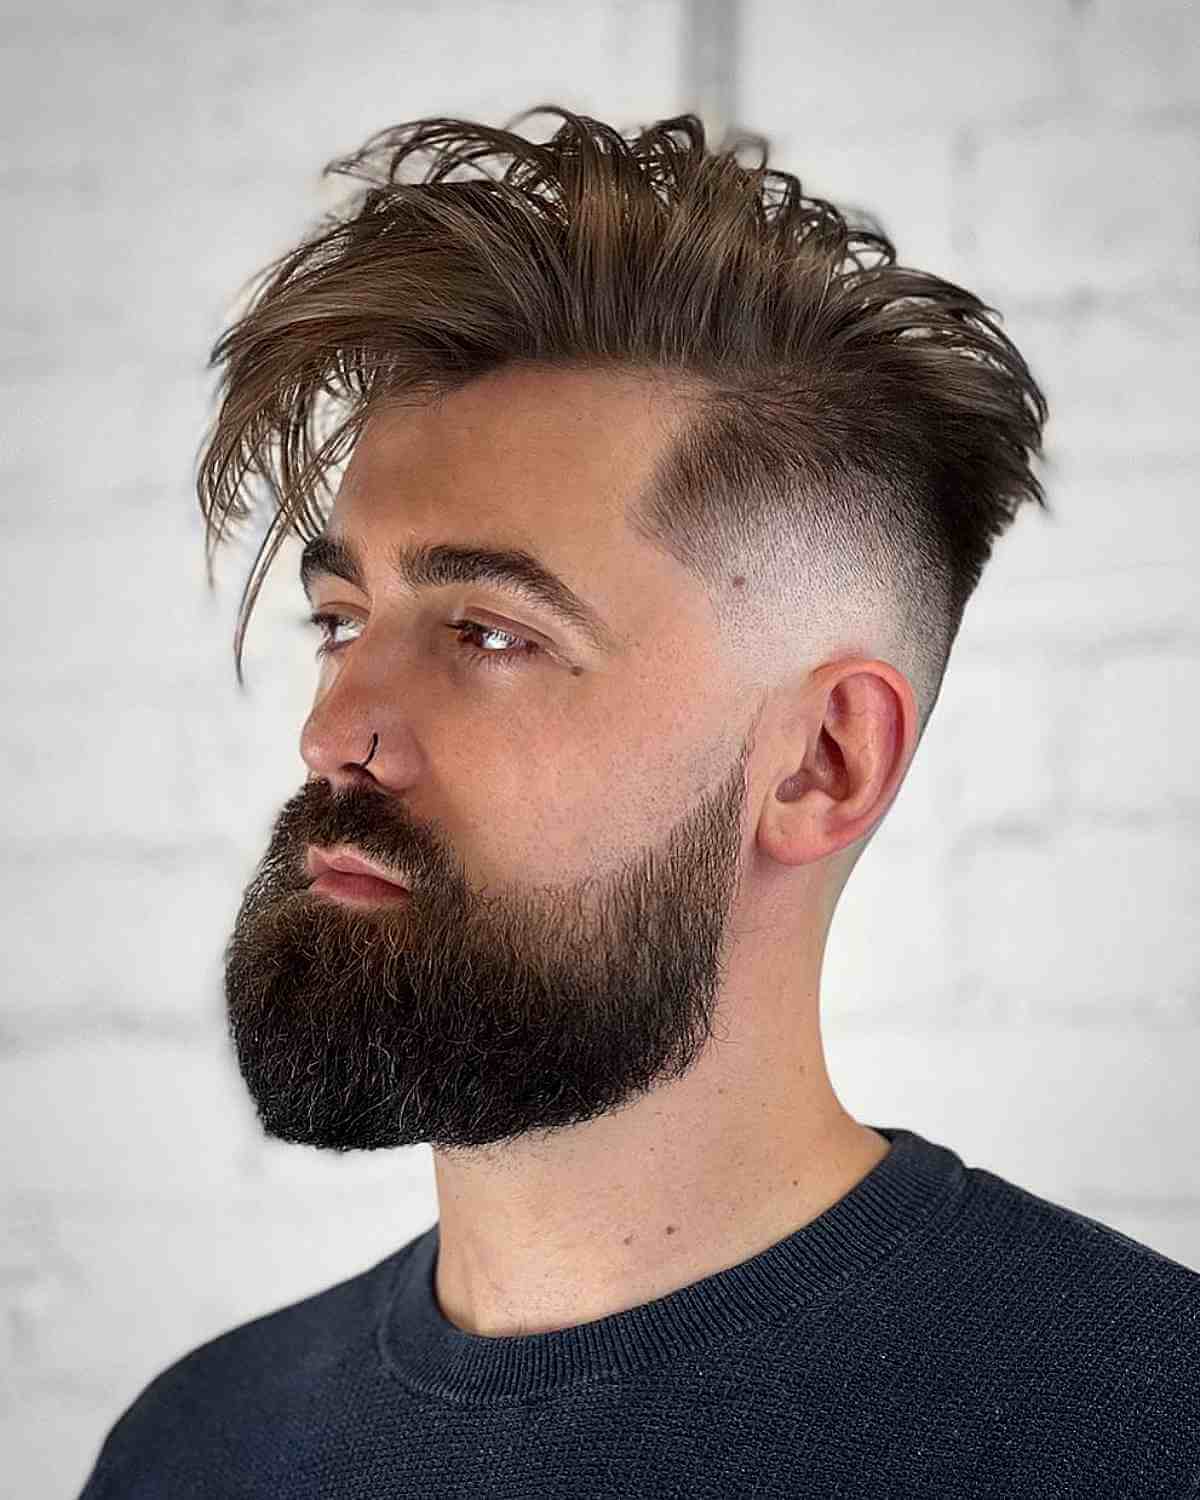 35 Stylish Crew Cut Hairstyles For Men in 2023